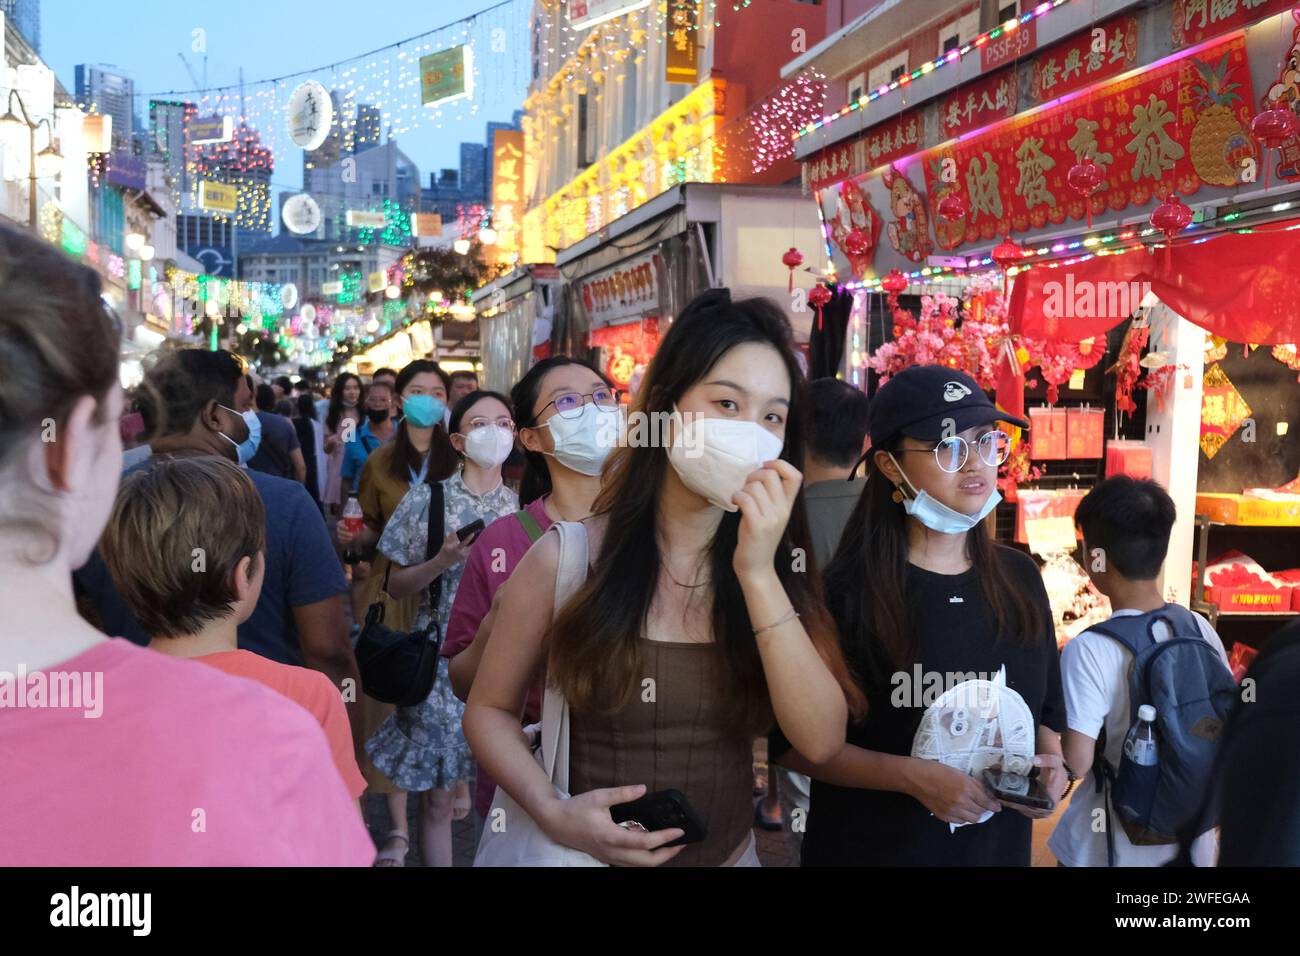 Girls in facemasks walk through a bustling market in Singapore's Chinatown ahead of the lunar new year Stock Photo